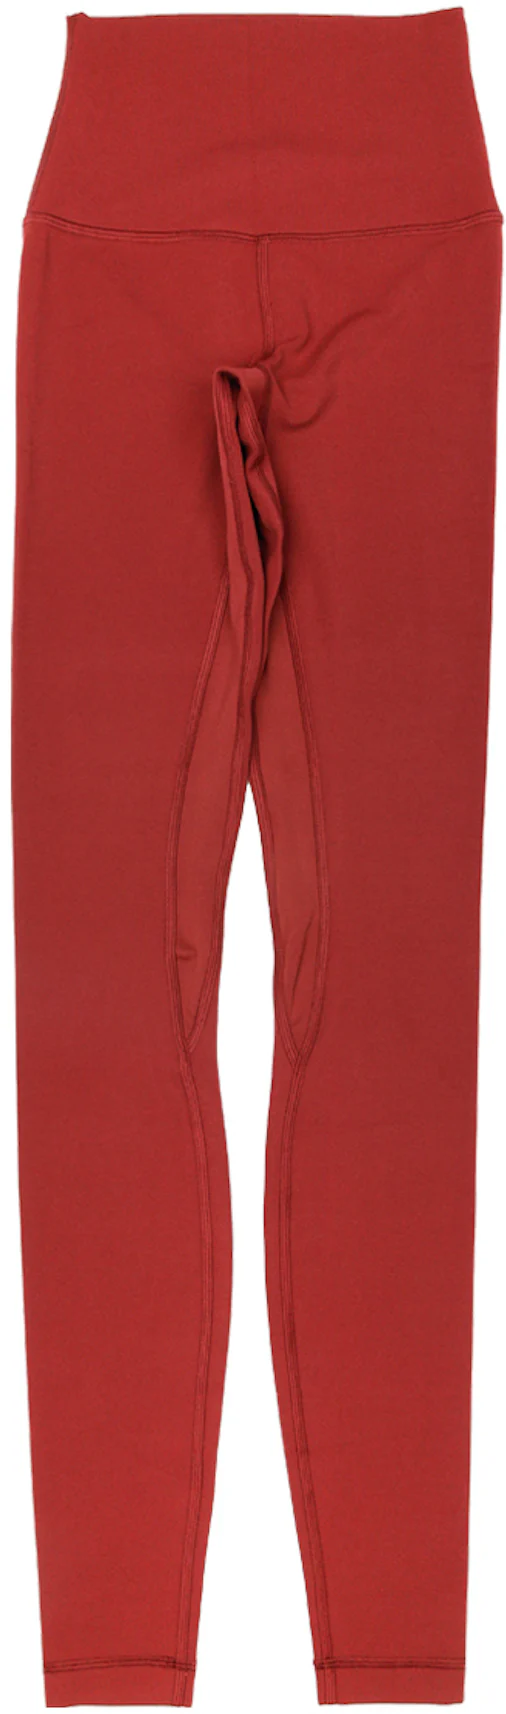 NWOT! Zenana Outfitters Ruby Red Mid Rise Fleece Lined Leggings. Size L/XL